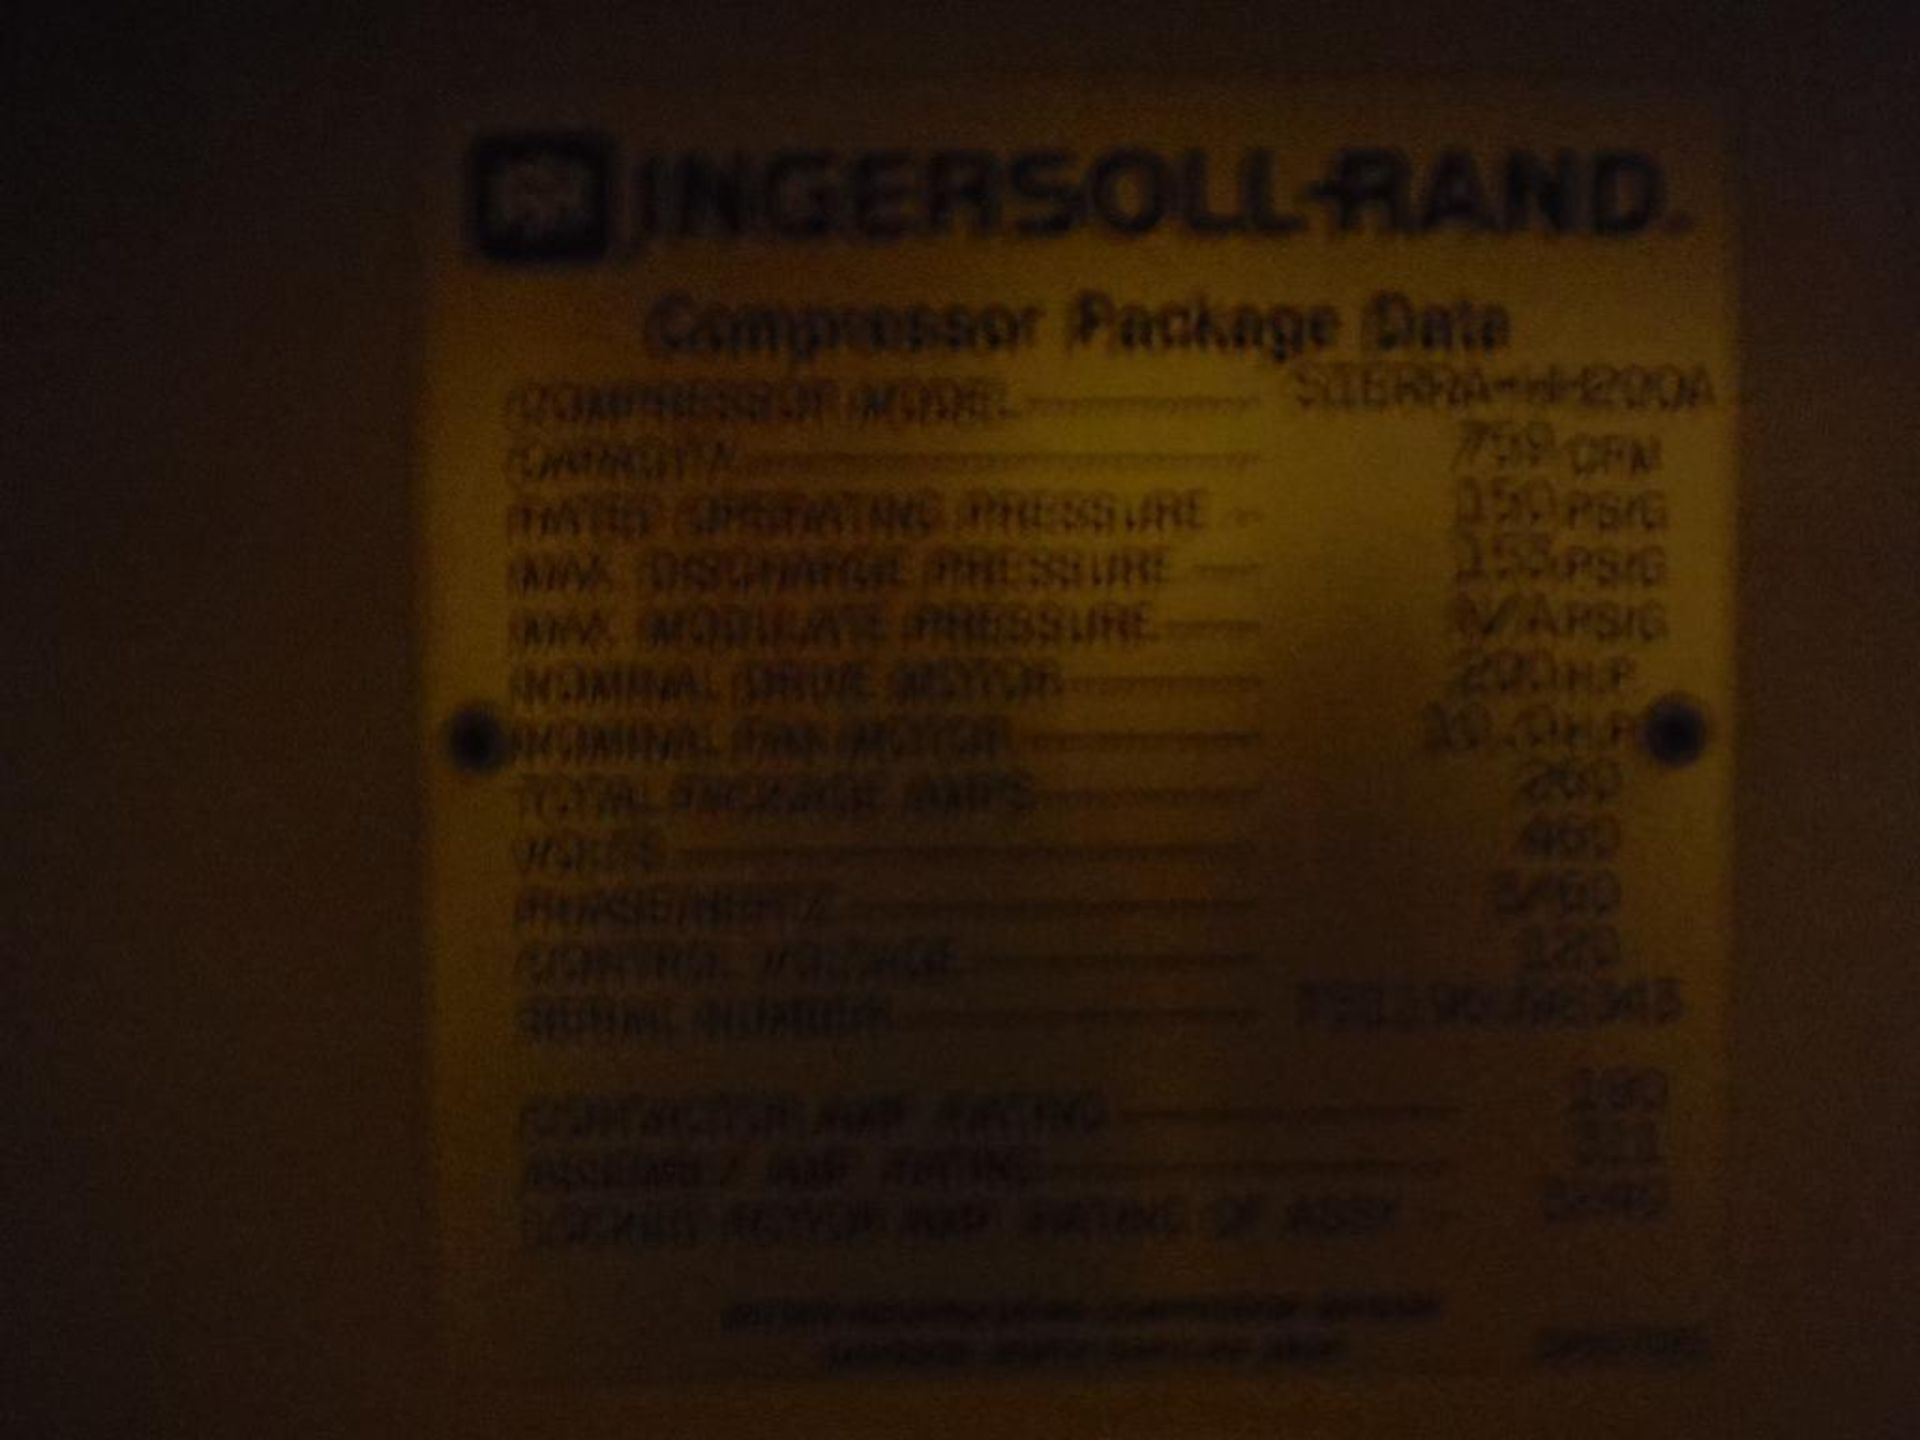 Ingersoll Rand Compressor, Model S-HH200A, SN TS1196U98343, 759 cfm, 200 hp, 460V, 3 phase, approx. - Image 7 of 11